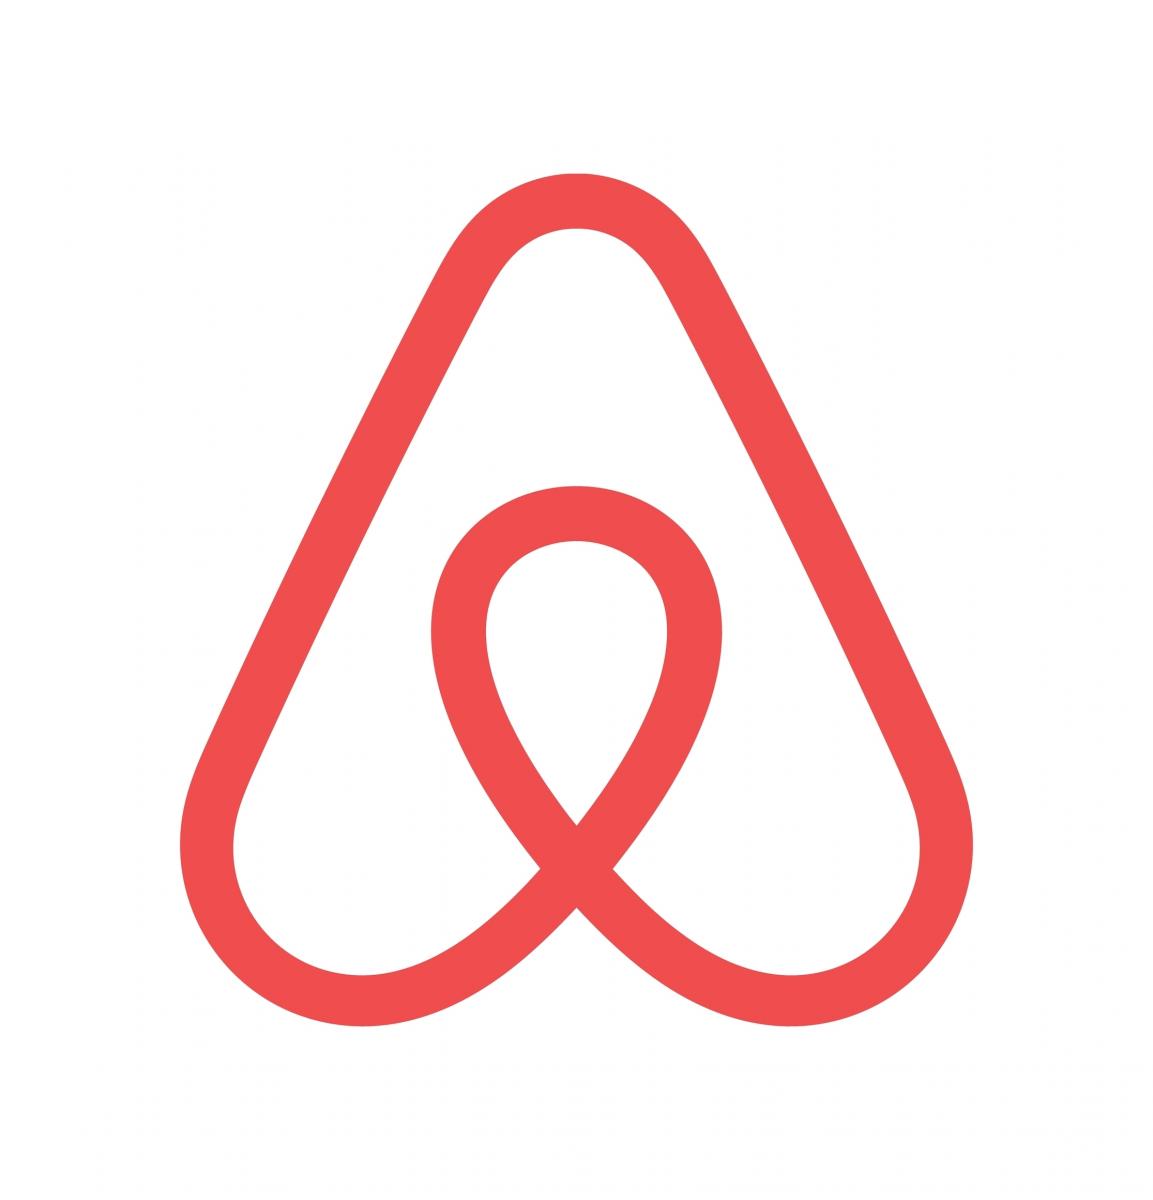 Strict Airbnb regulation gets a massive thumbs-down